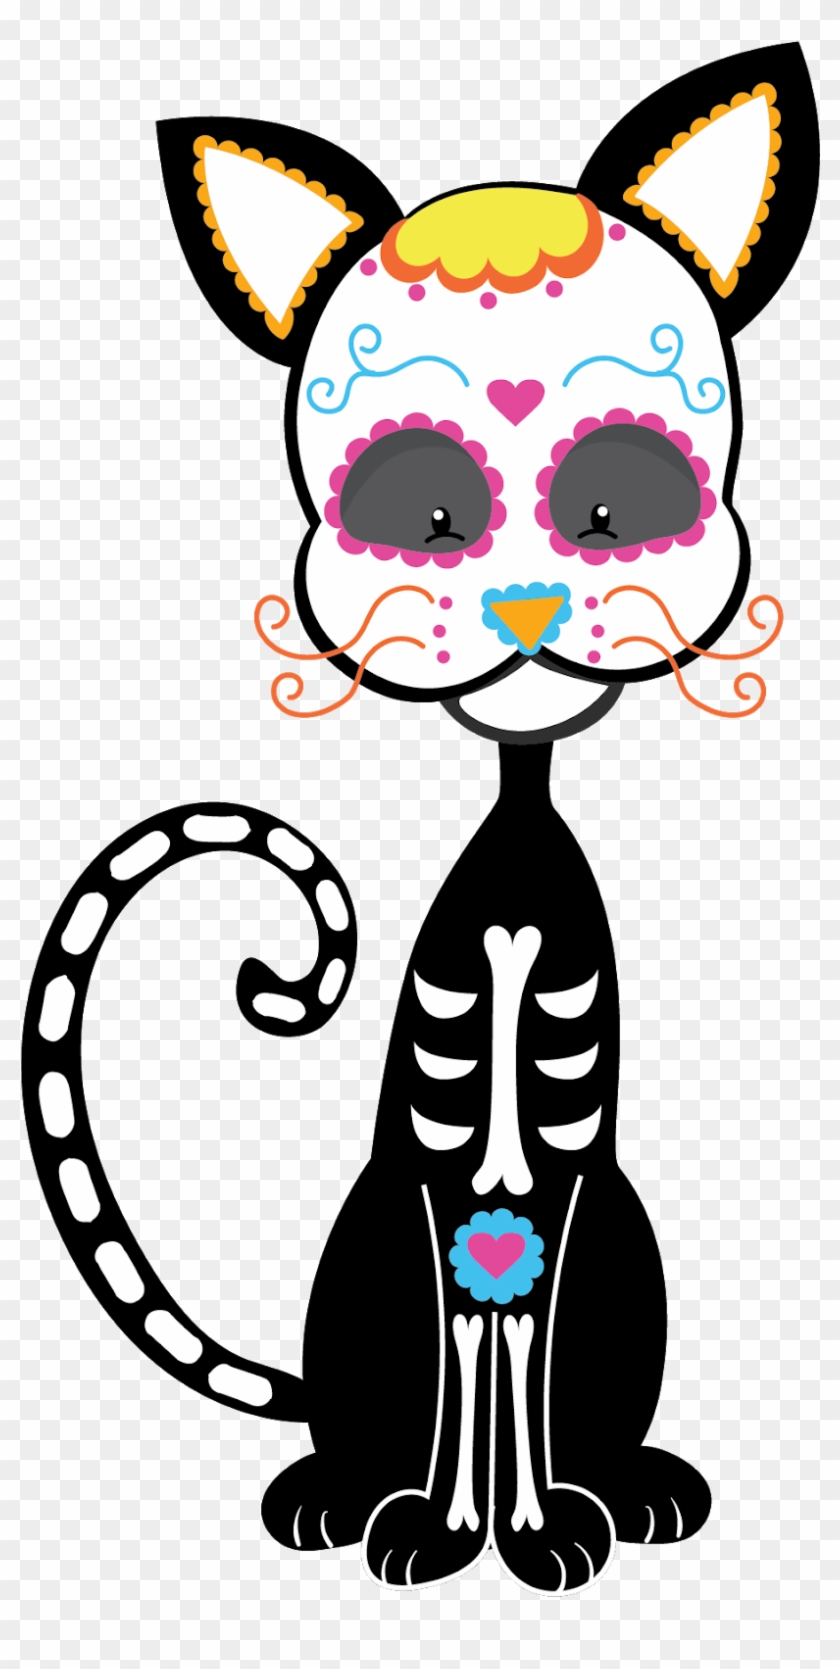 Coloring Calaveras And Alebrijes Can Be An Appropriate - Gato Dia De Muerto  Png - Free Transparent PNG Clipart Images Download